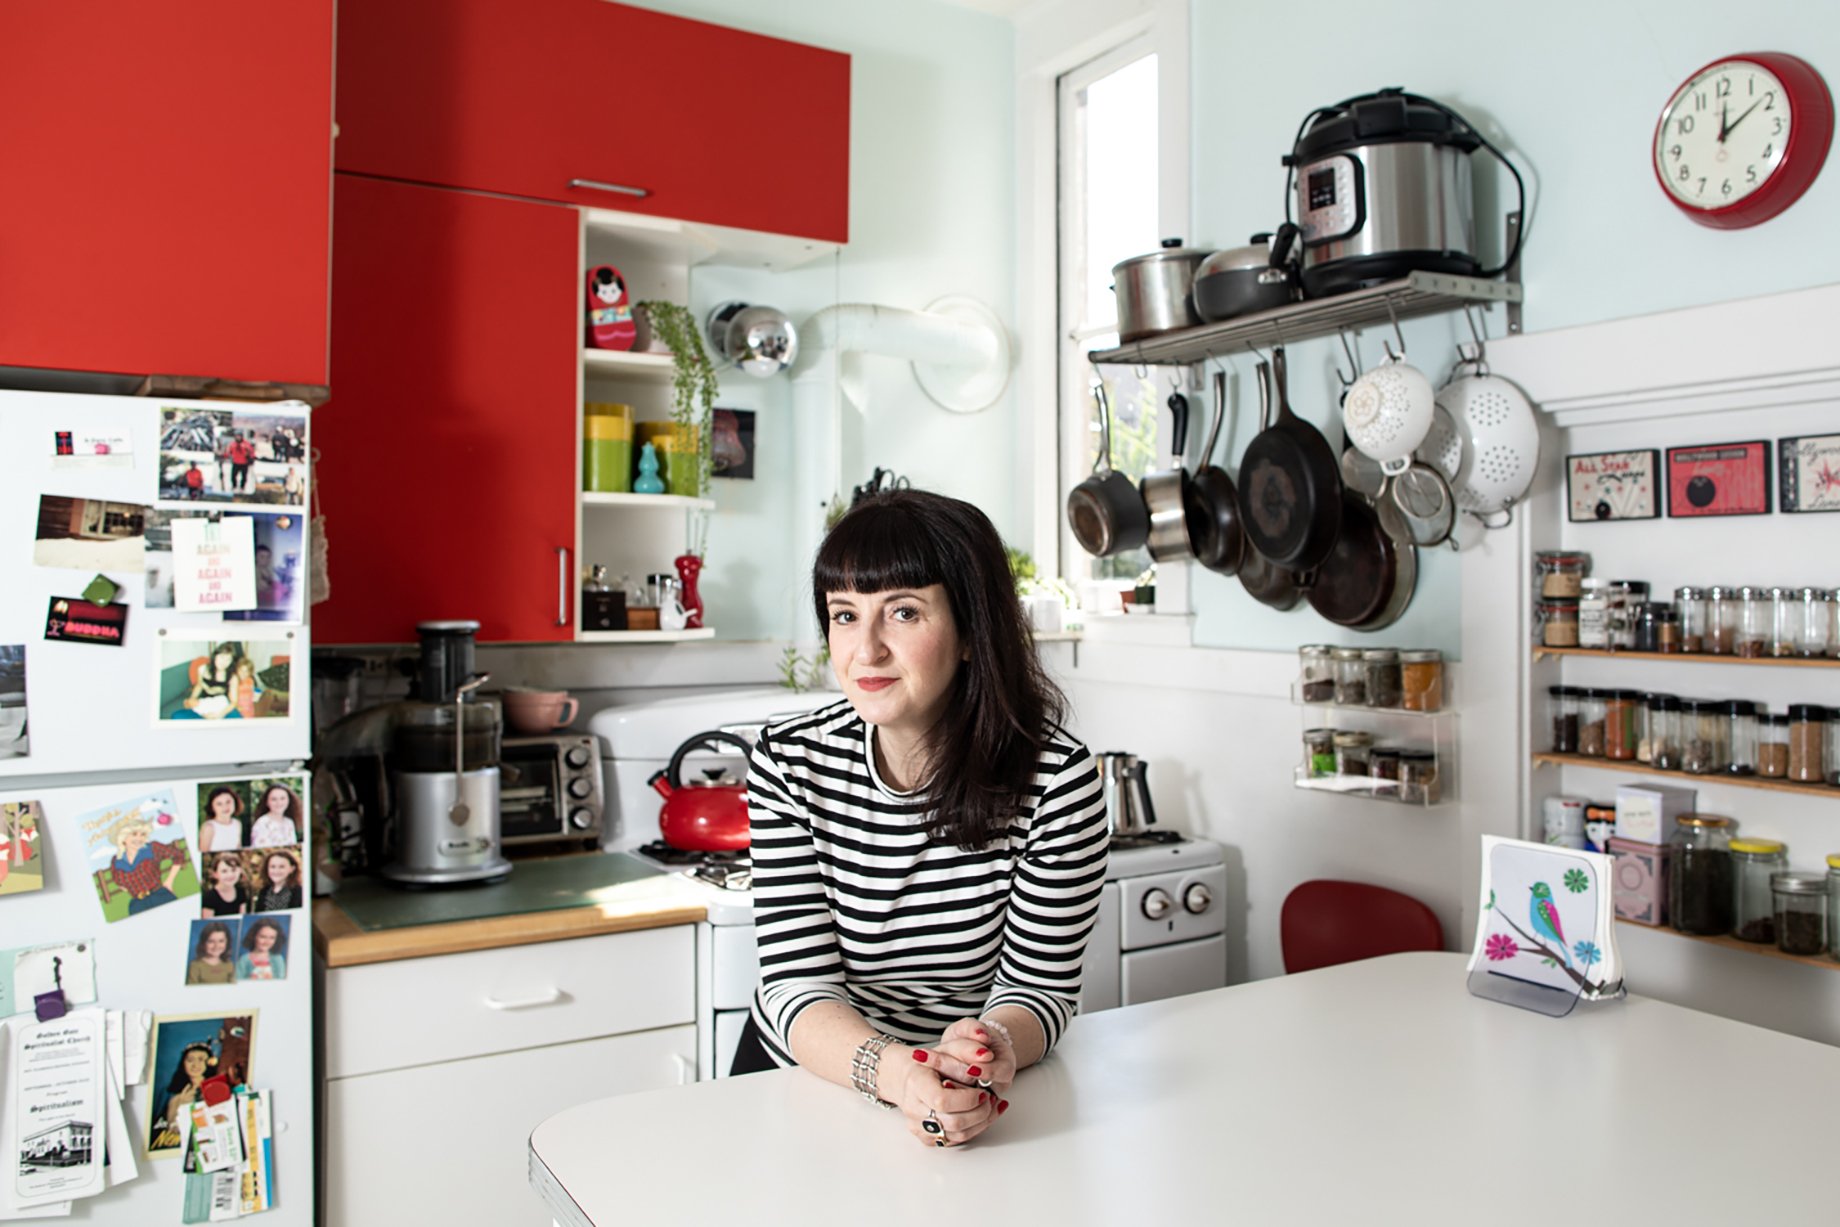 Woman in an organized kitchen with bright red cabinets shot by Jaime Borschuk for Women at Home project